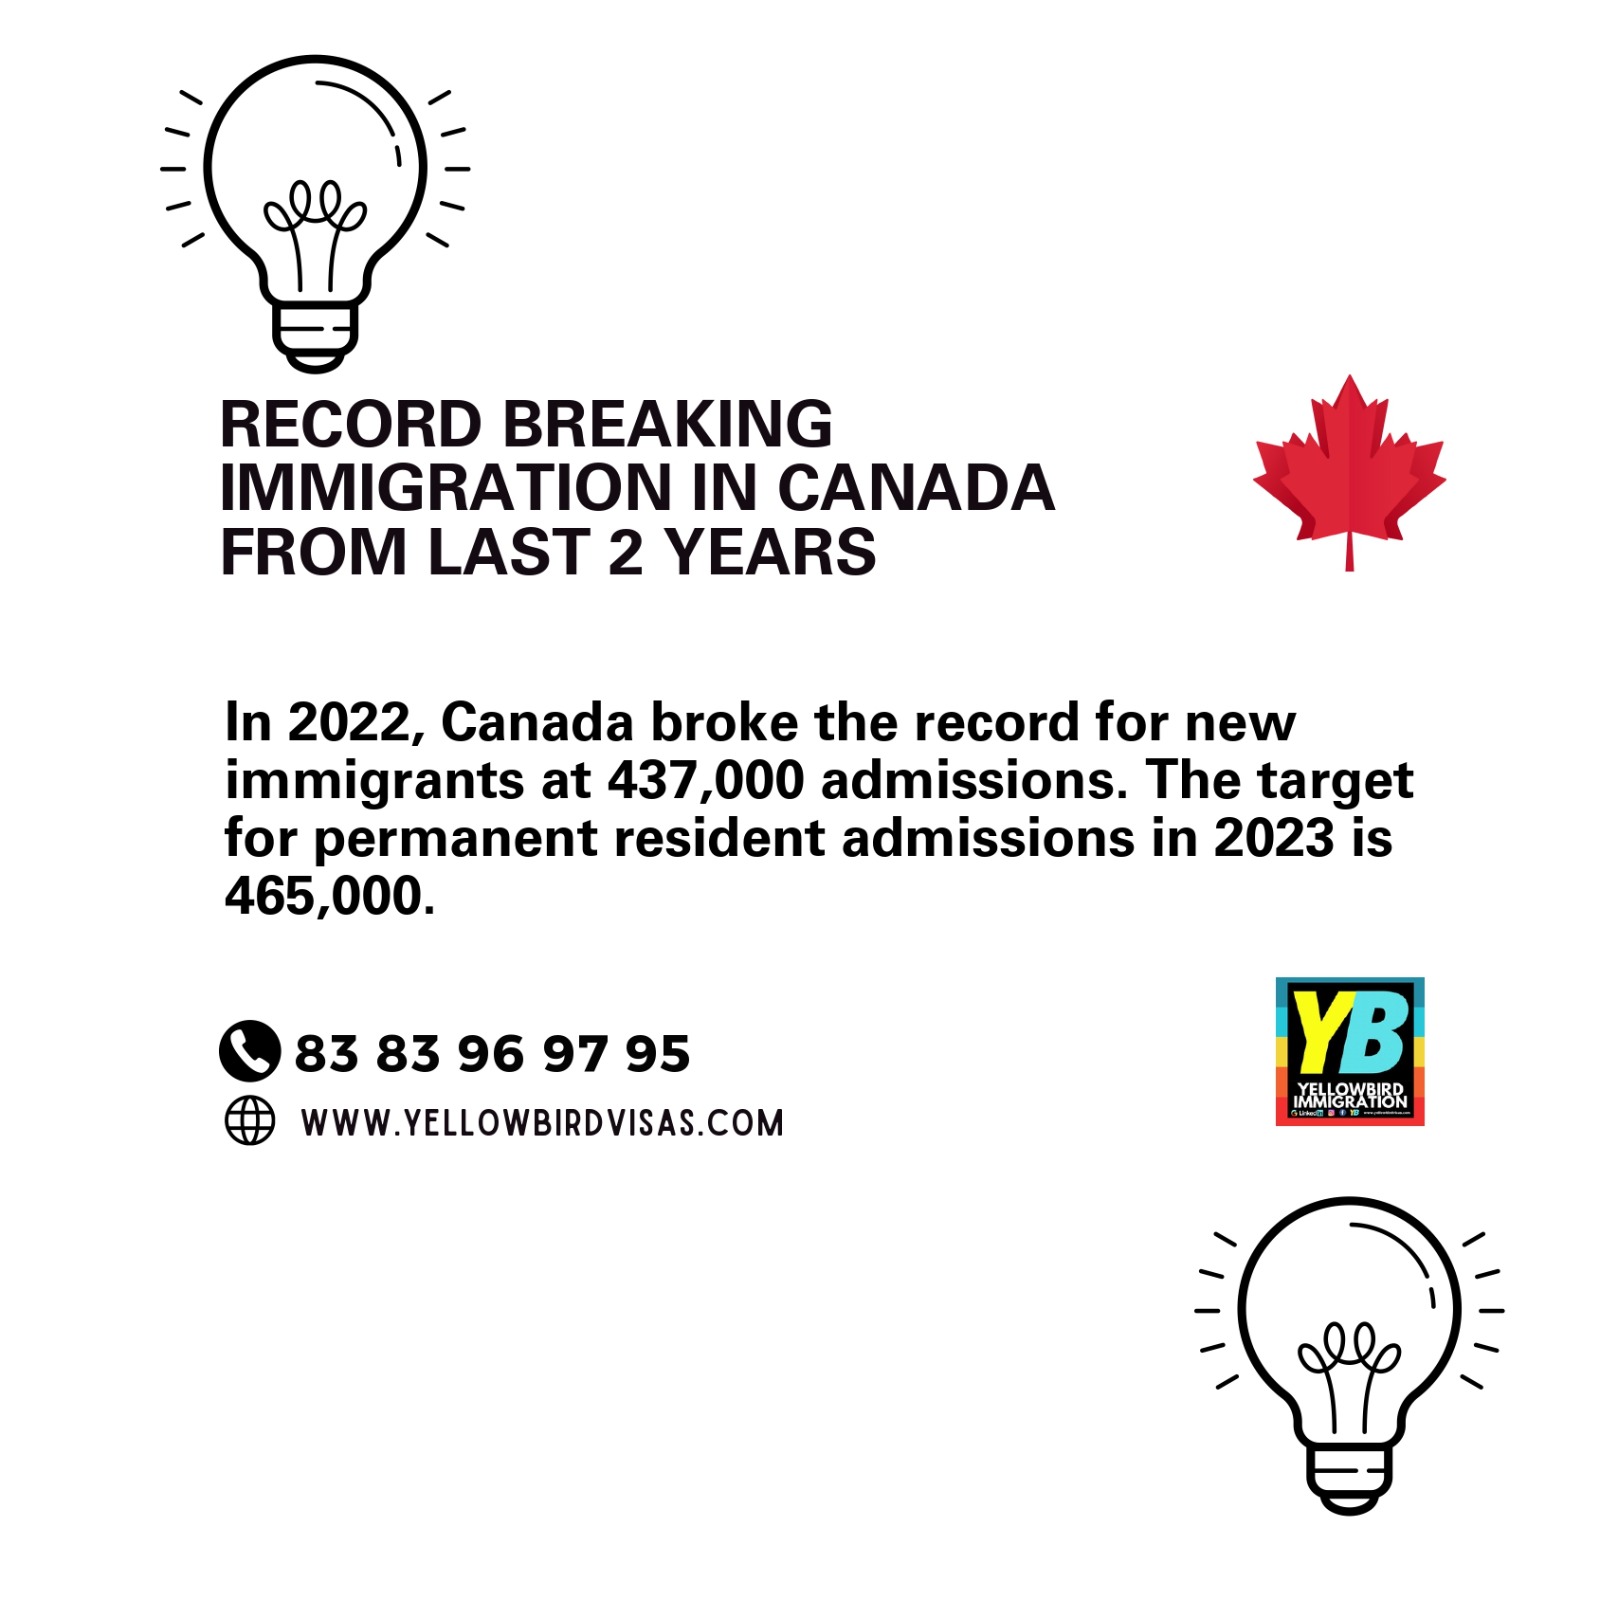 RECORD BREAKING IMMIGRATION IN CANADA